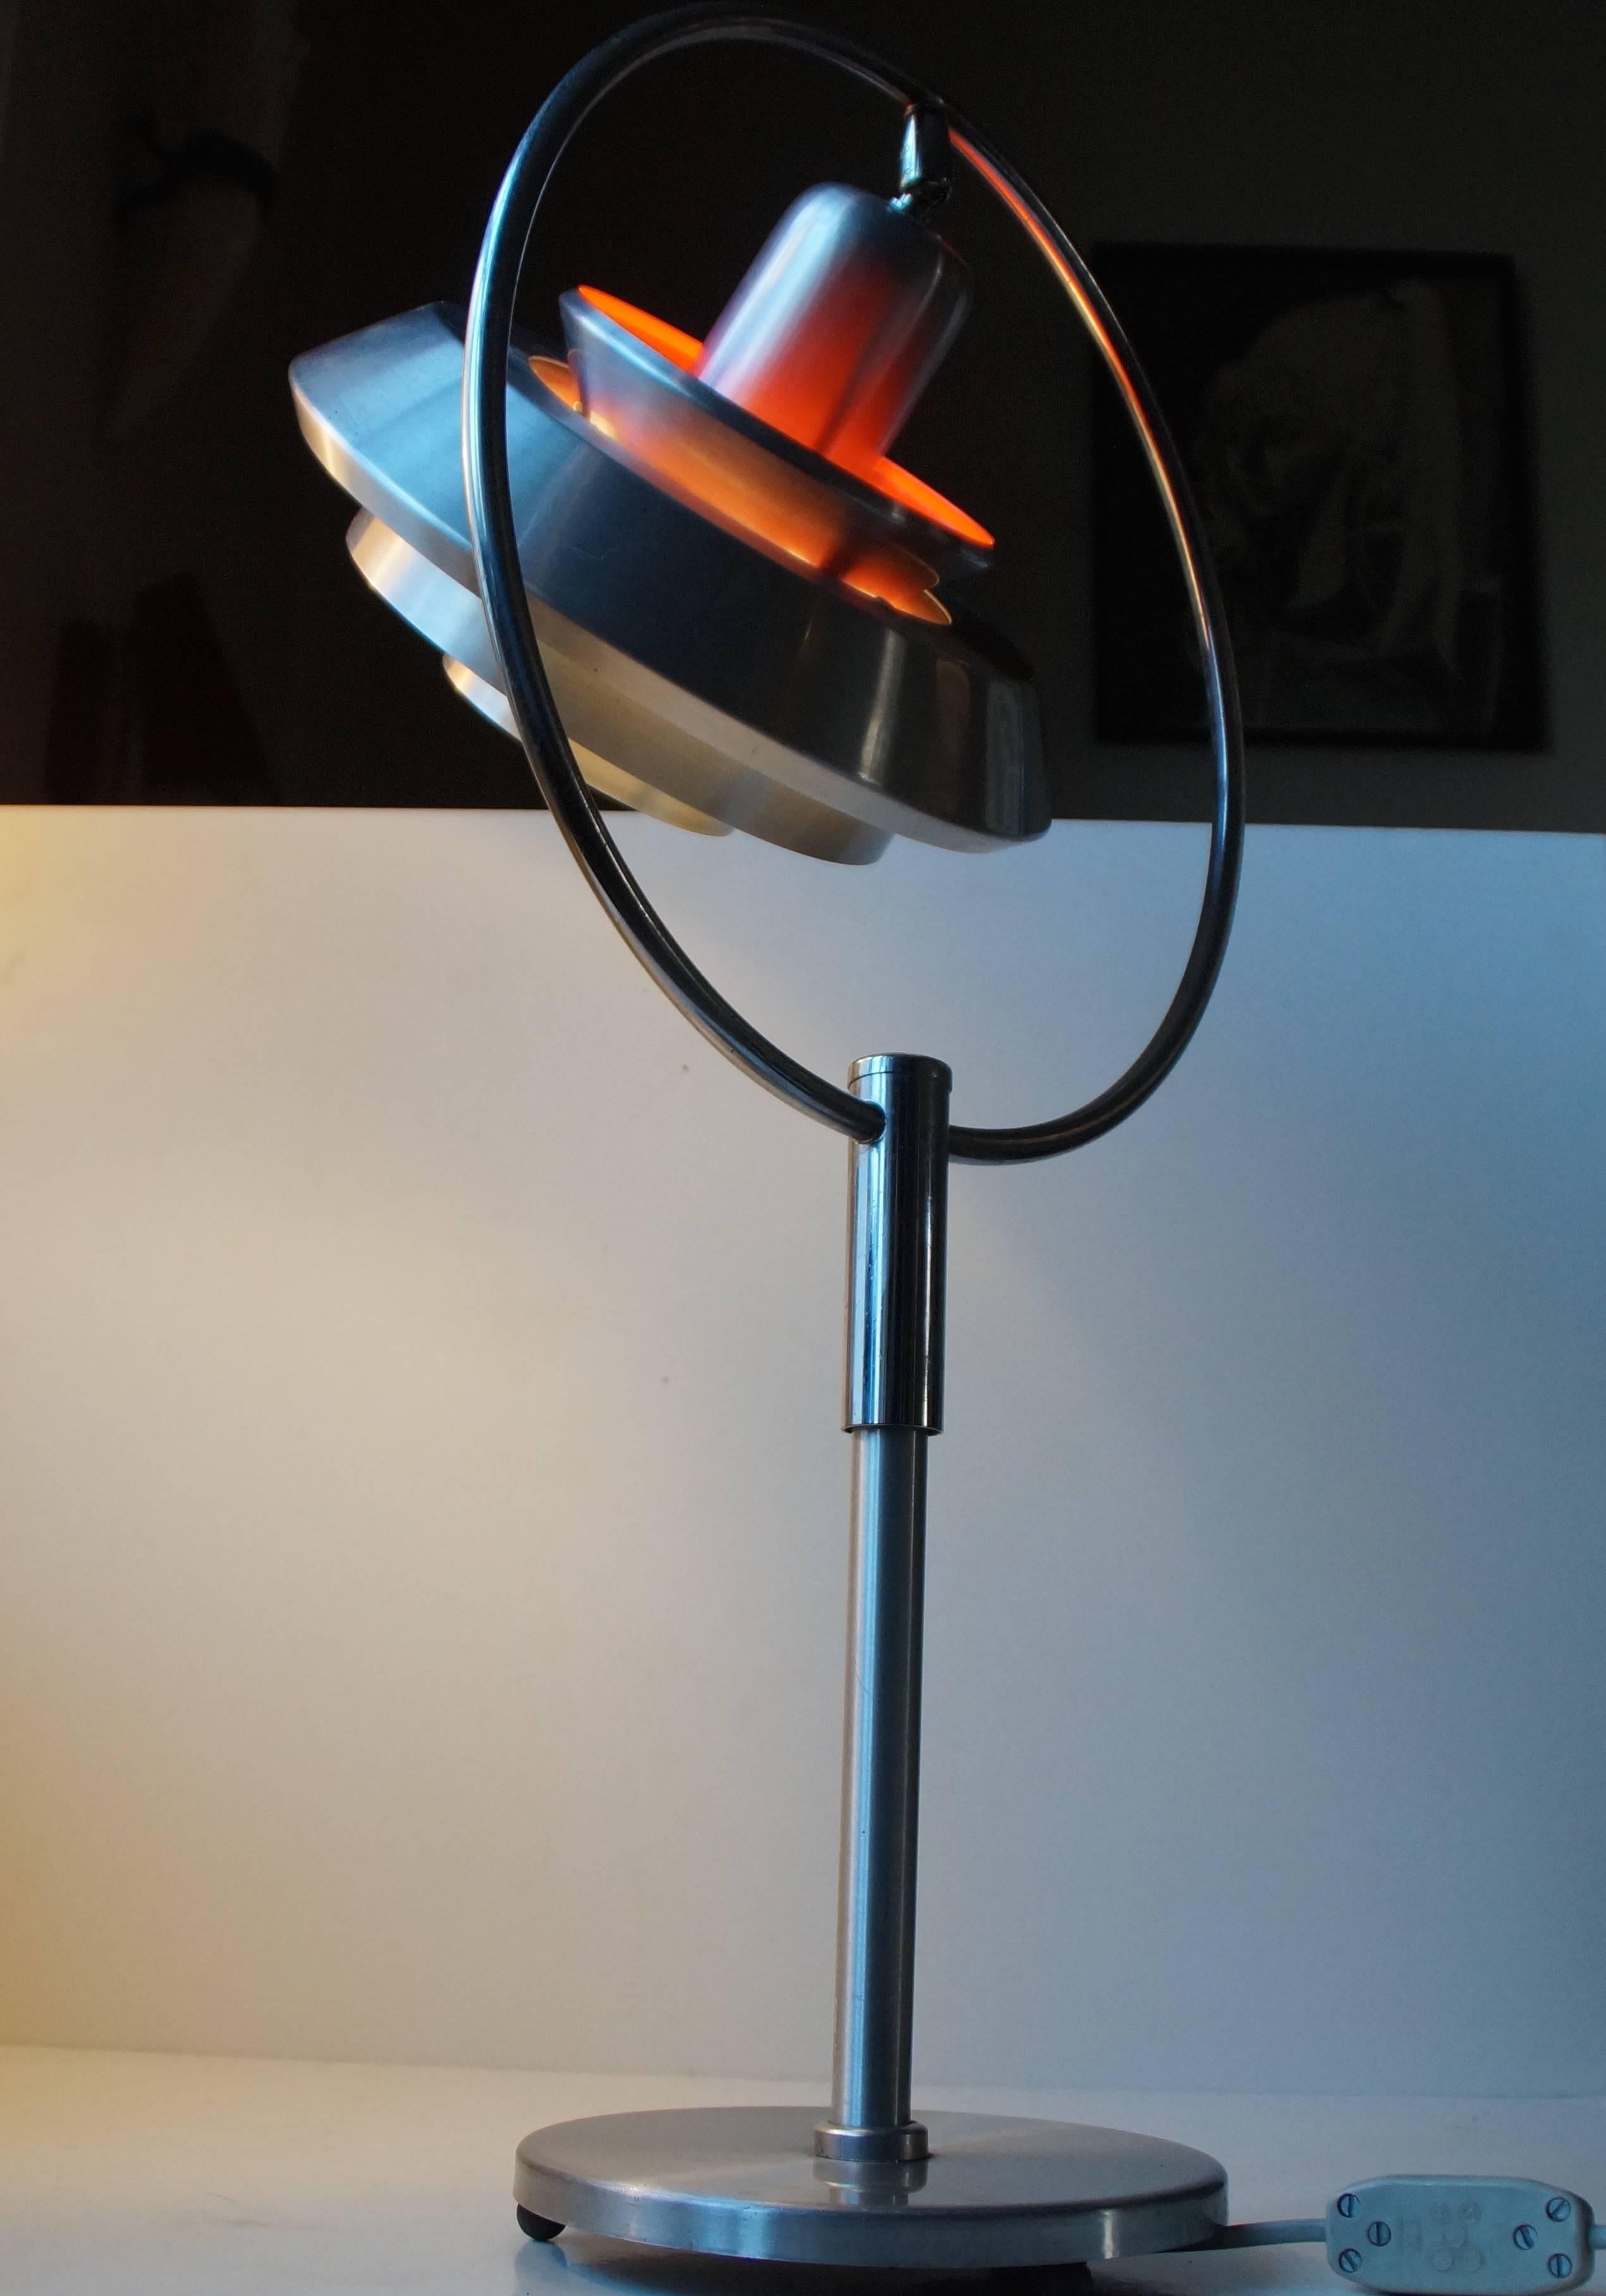 Brushed aluminium and chromed steel table light - desk lamp designed by Sigurd Lindkvist Alias Carl Thore. Manufactured by Granhaga Metalindustri in the mid-1960s. The shade is adjustable to both sides via the orbit ring. Measurements: H: 20